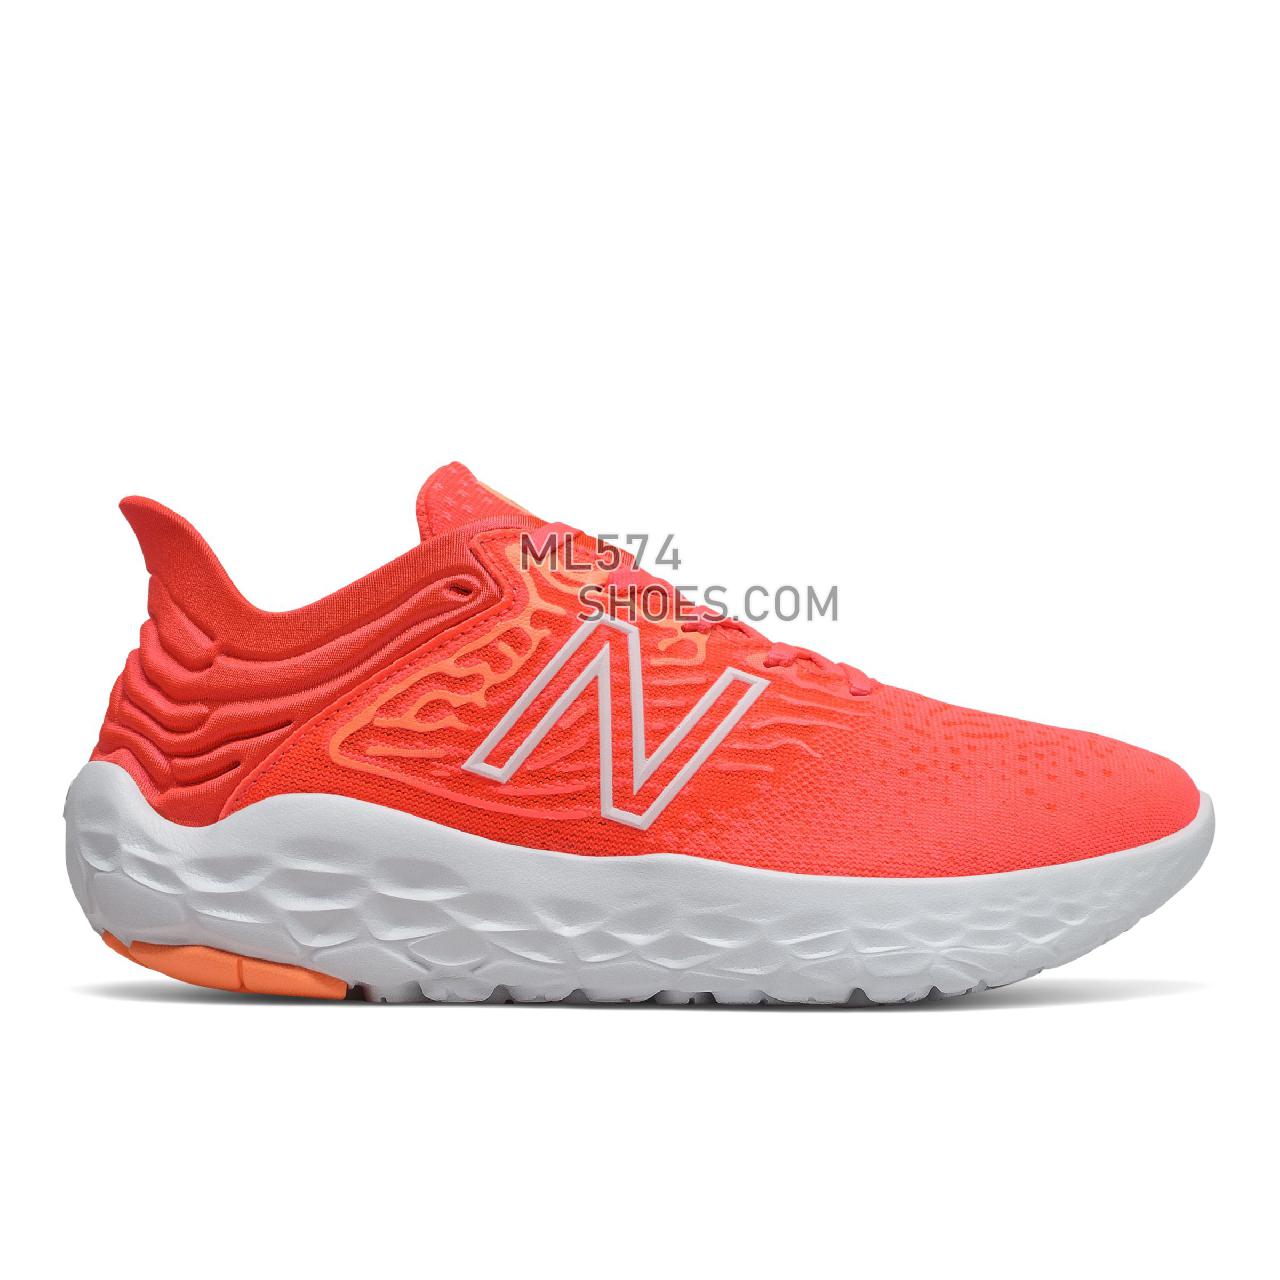 New Balance Fresh Foam Beacon v3 - Women's Neutral Running - Vivid Coral with Citrus Punch - WBECNCP3